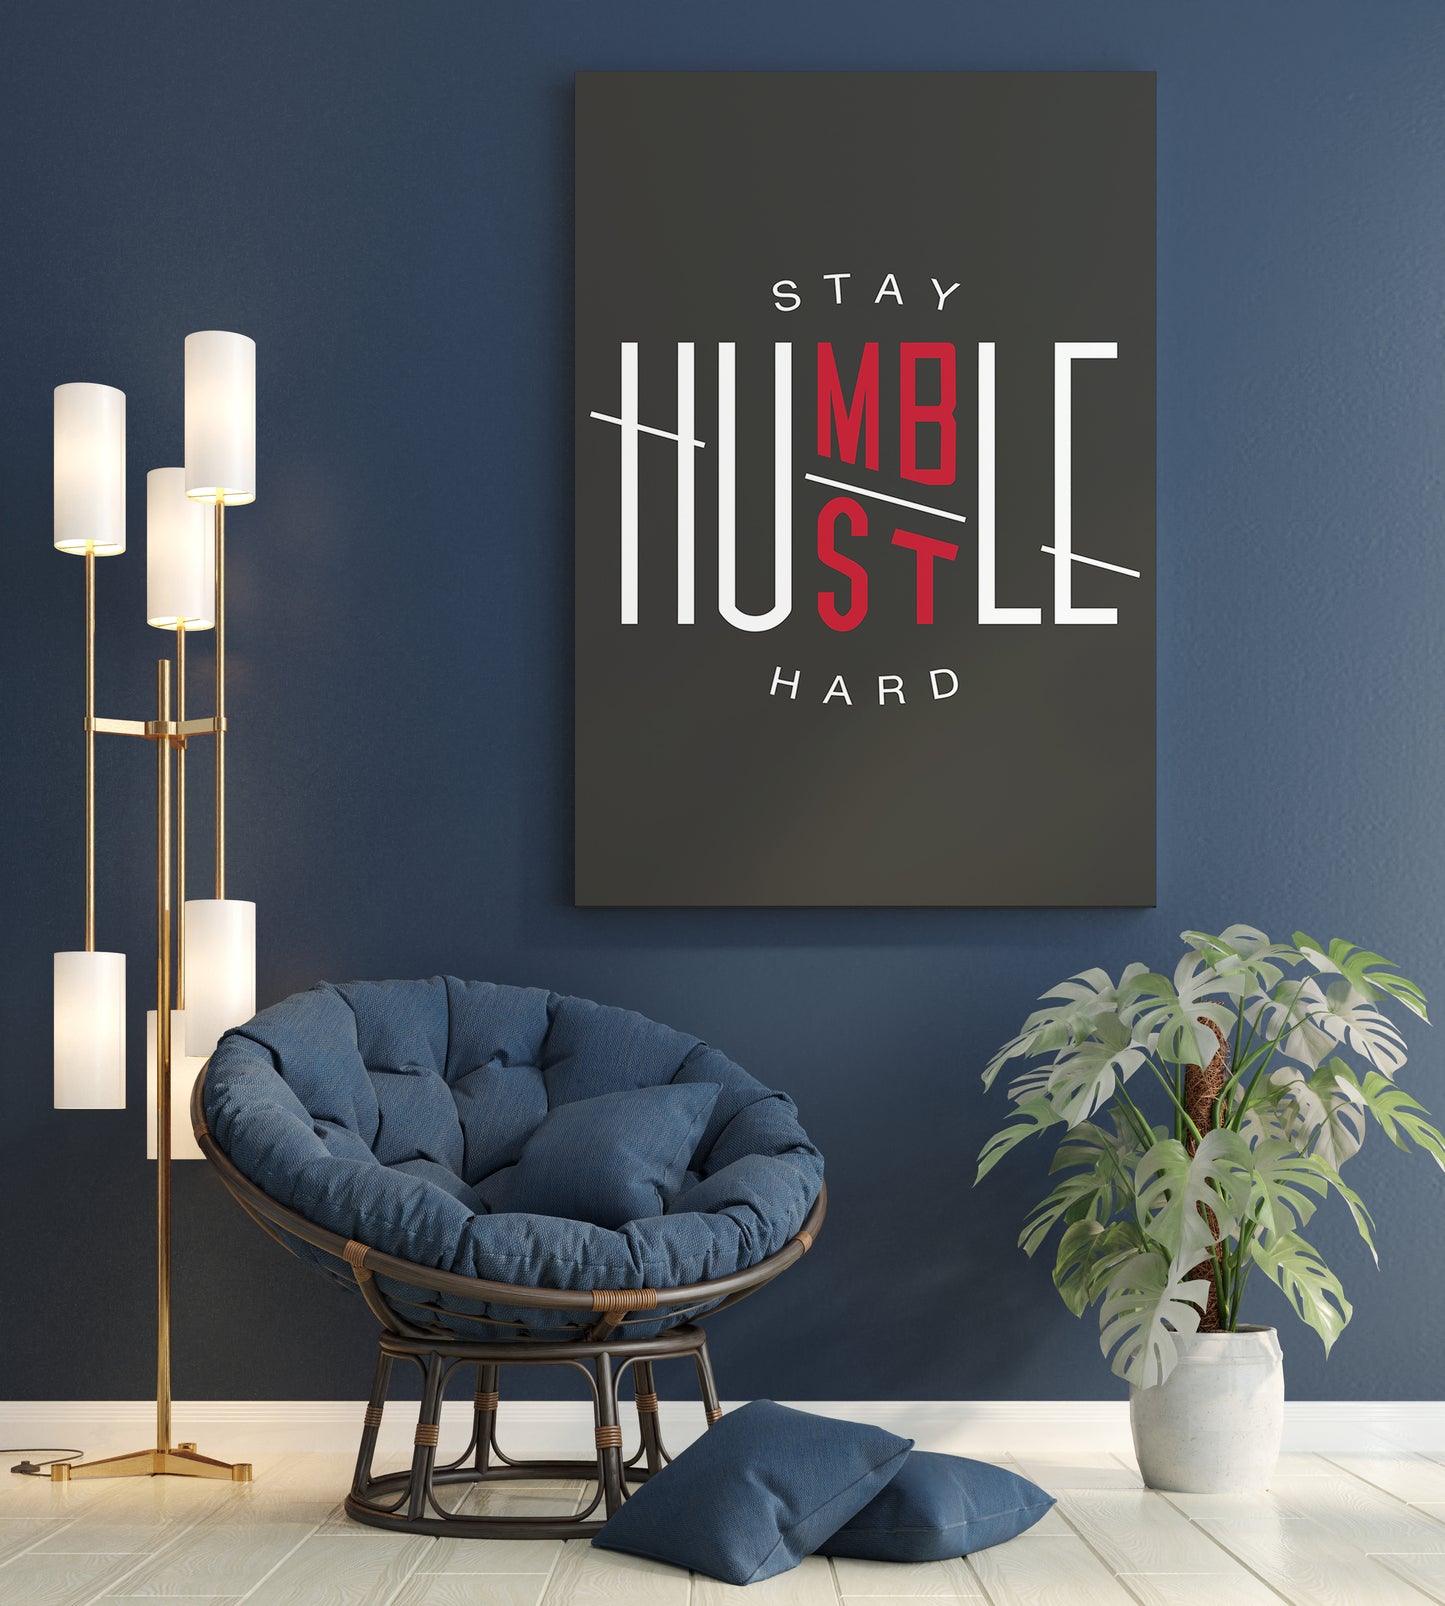 Stay Humble - Hustle Hard - Vented Canvas